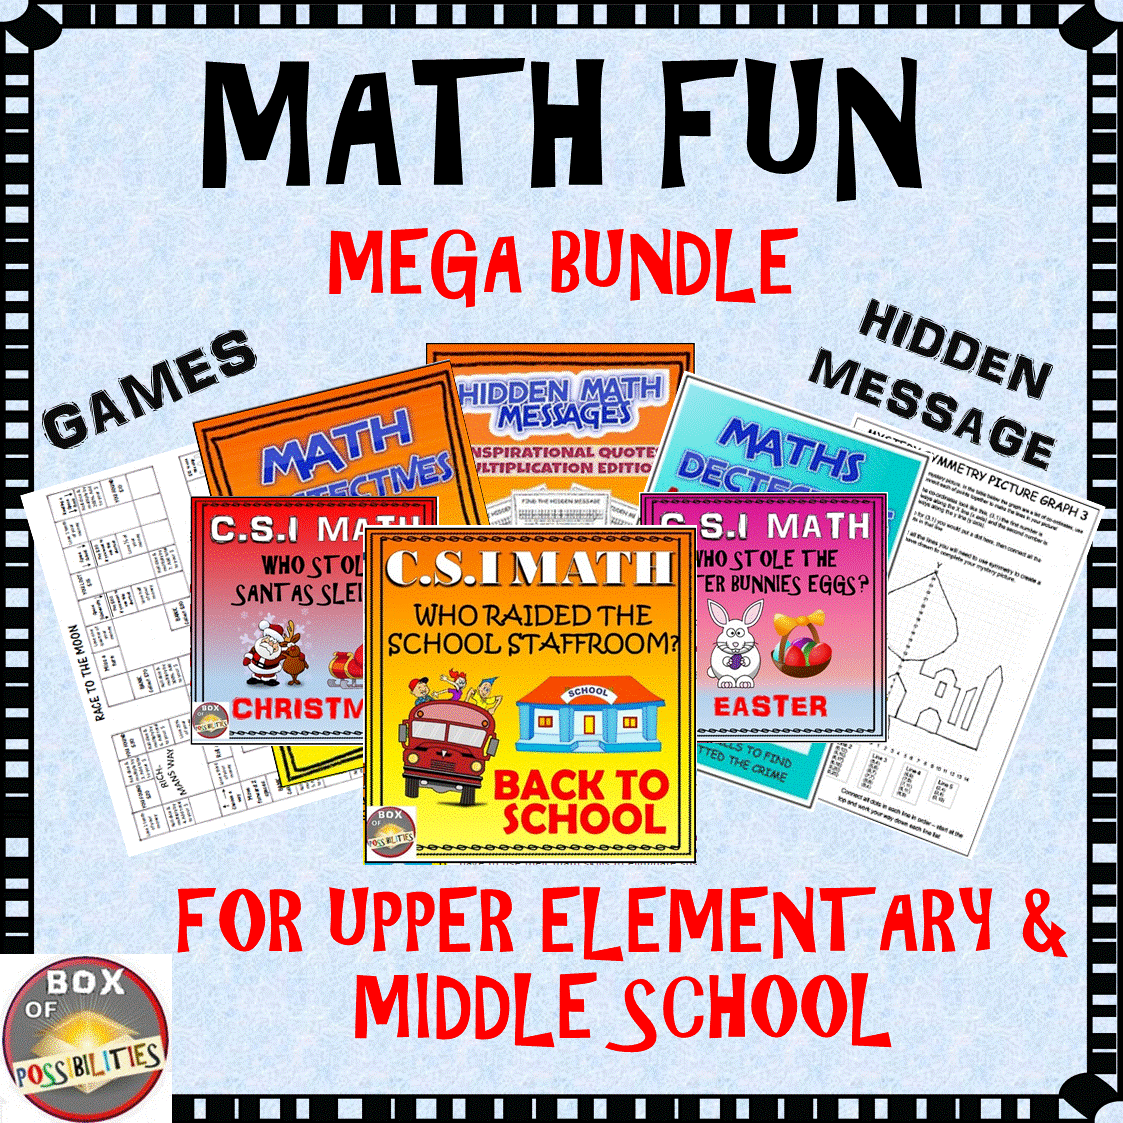 Math fun mega bundle. Math games, CSI, mystery messages, multiplication mazes, mystery pictures - this bundle has it all. It is full with fun math activities that your elementary or middle school students will love. These math activities can be used as a review or fun classroom activities. #math #CSImath #elementary #mathactivities #middleschool #mathgames #grade5 #grade6 #CSI #worksheets #activities #multiplication #mathmystery